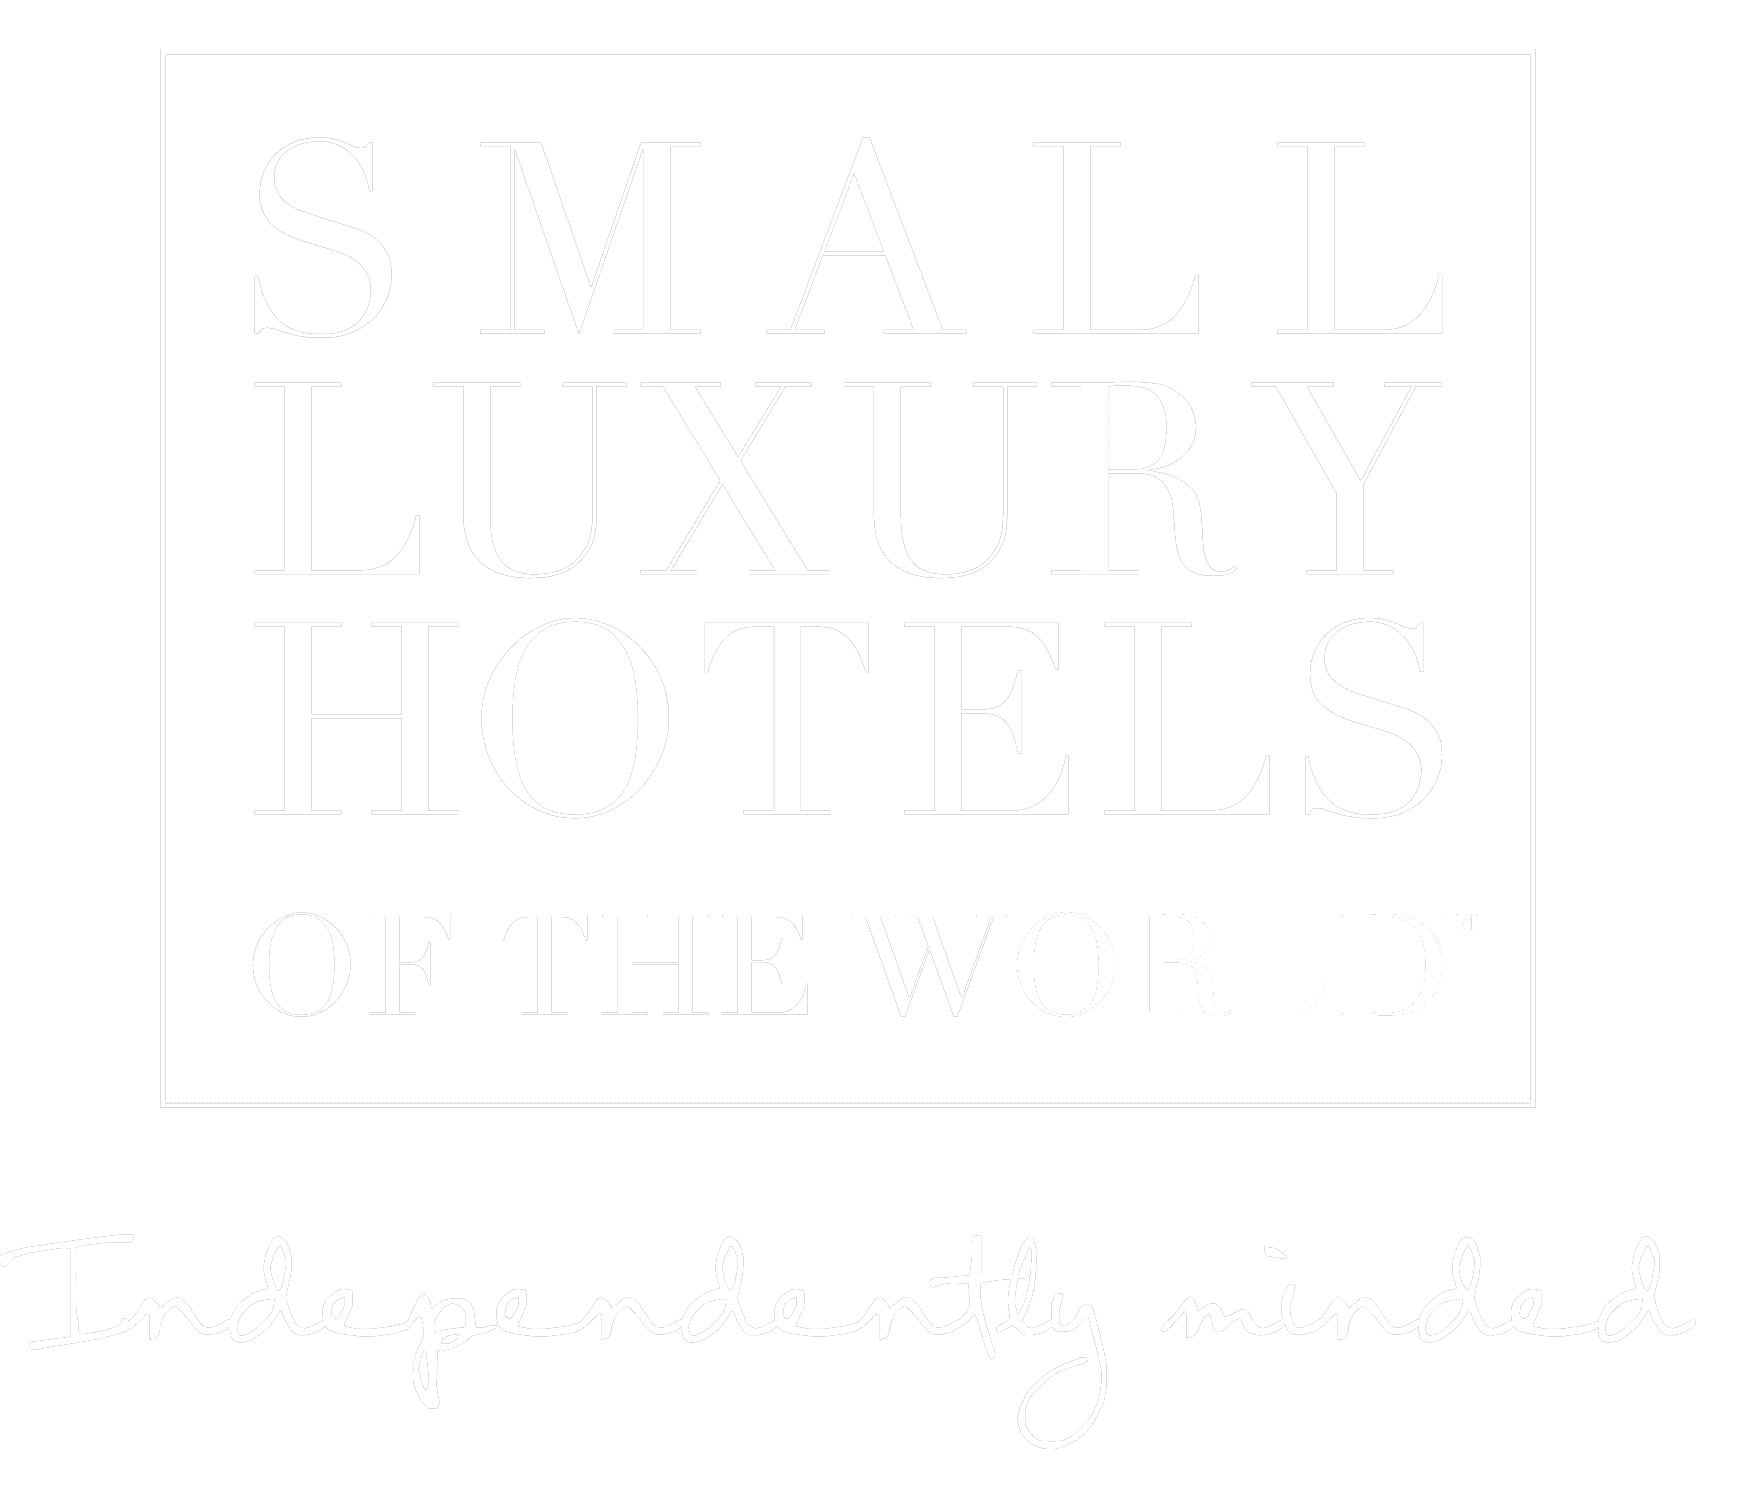 Sign that says, "Small Luxury Hotels of the World Independently minded."